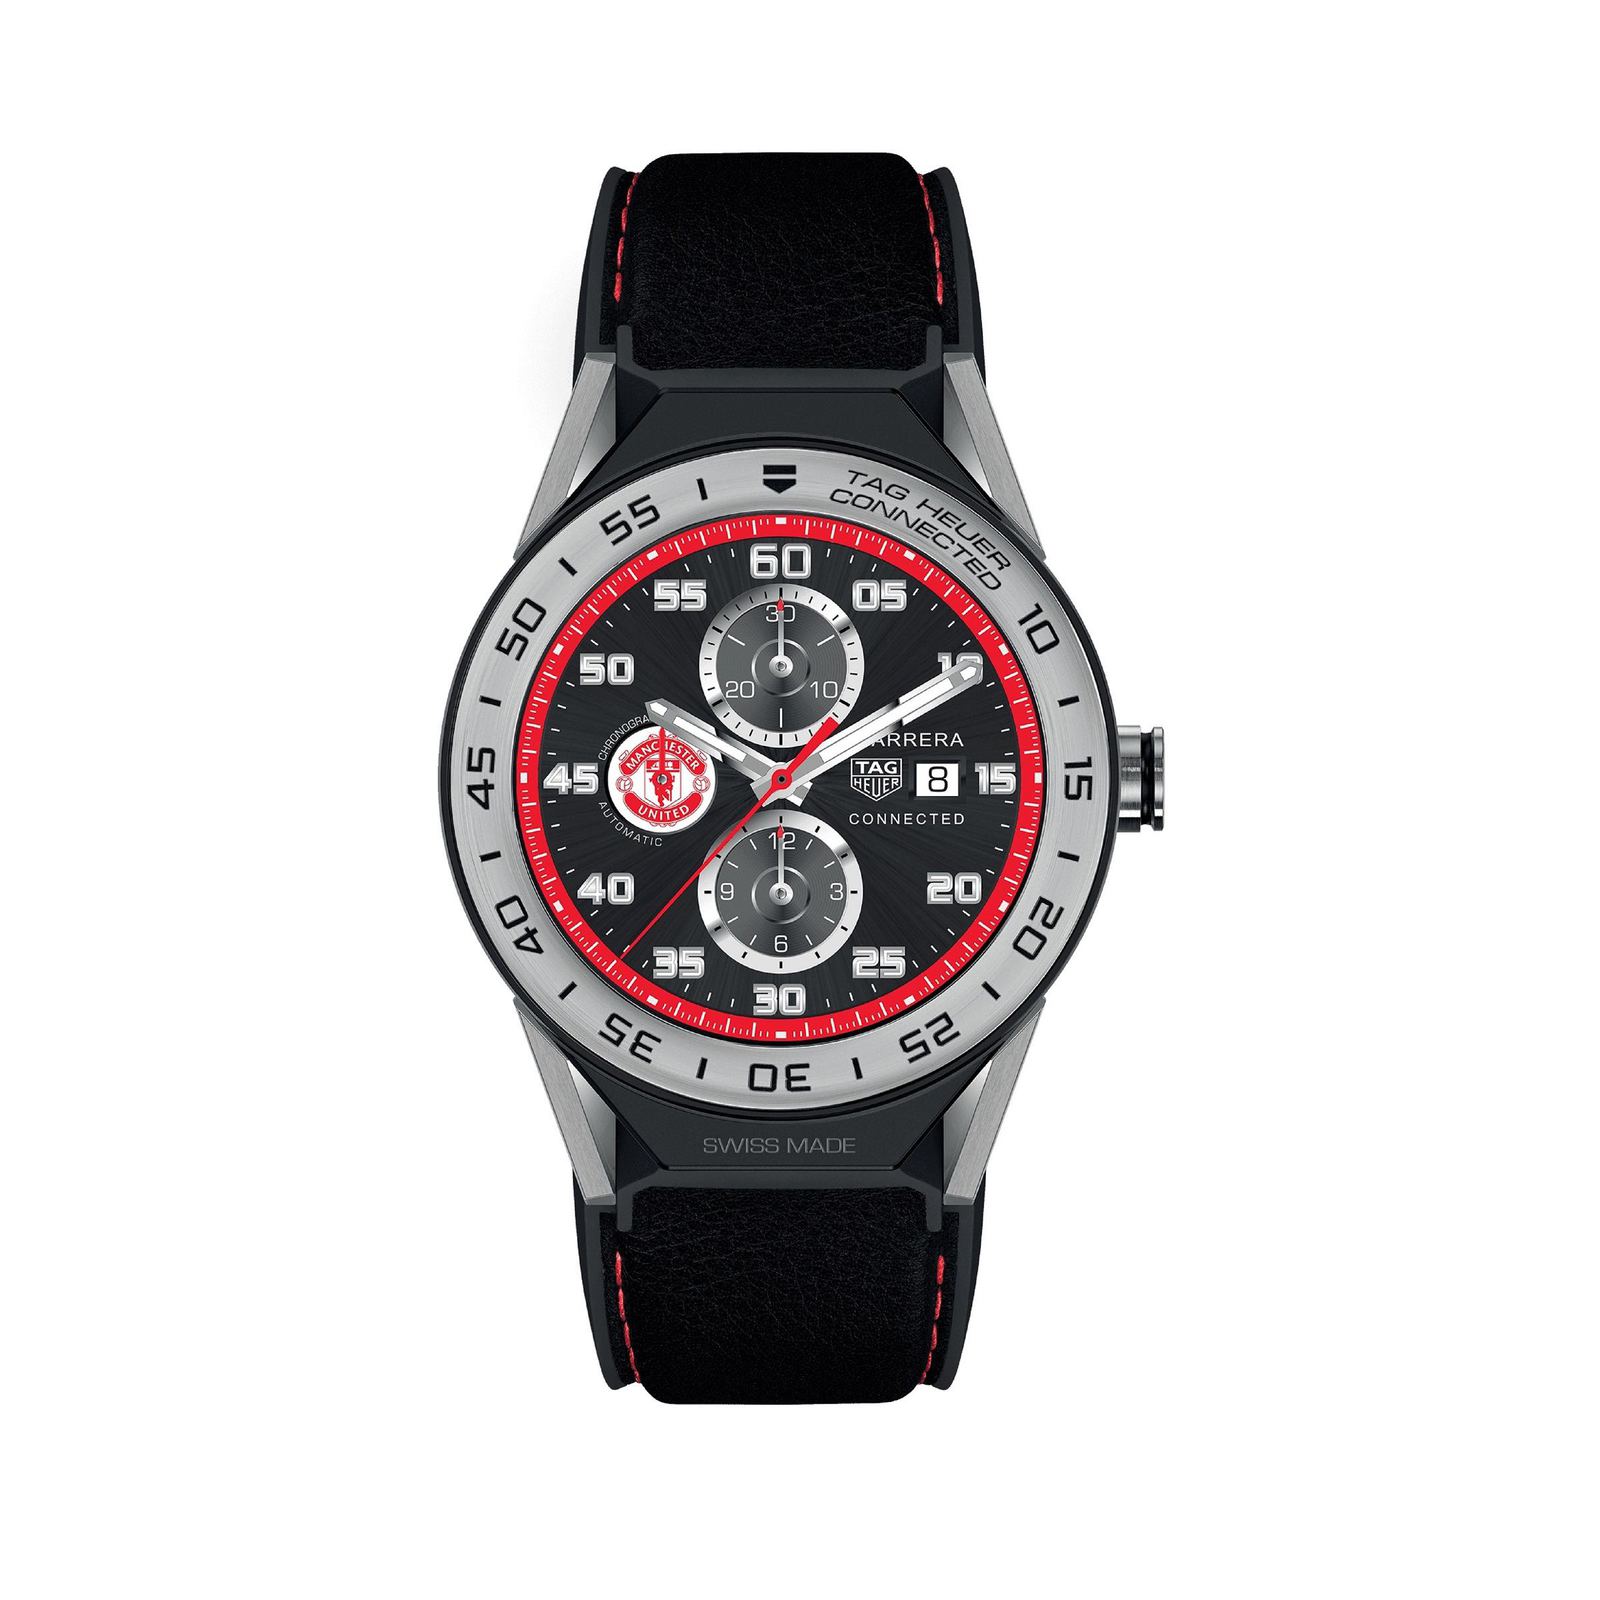 Tag Heuer Connected Modular 45 Full Specifications